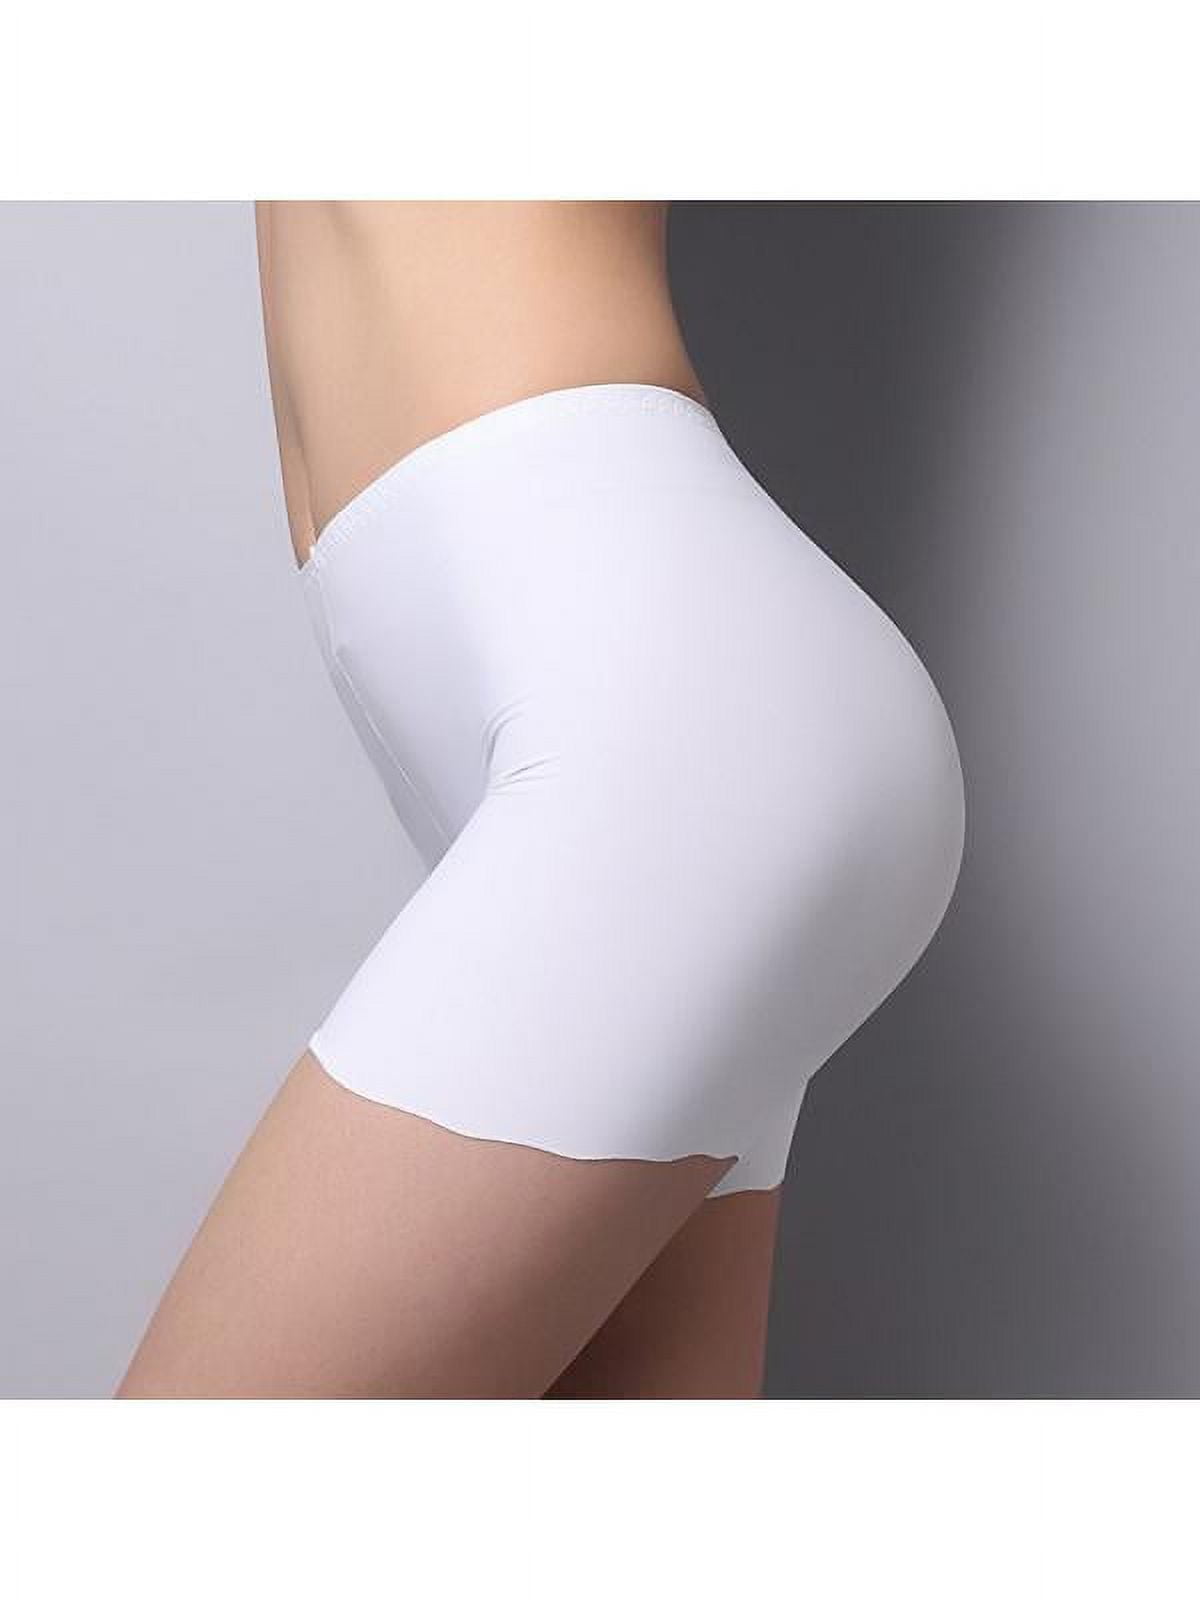 Womens Safety Shorts Pants Seamless Under Skirt Double-Layer Front Underwear